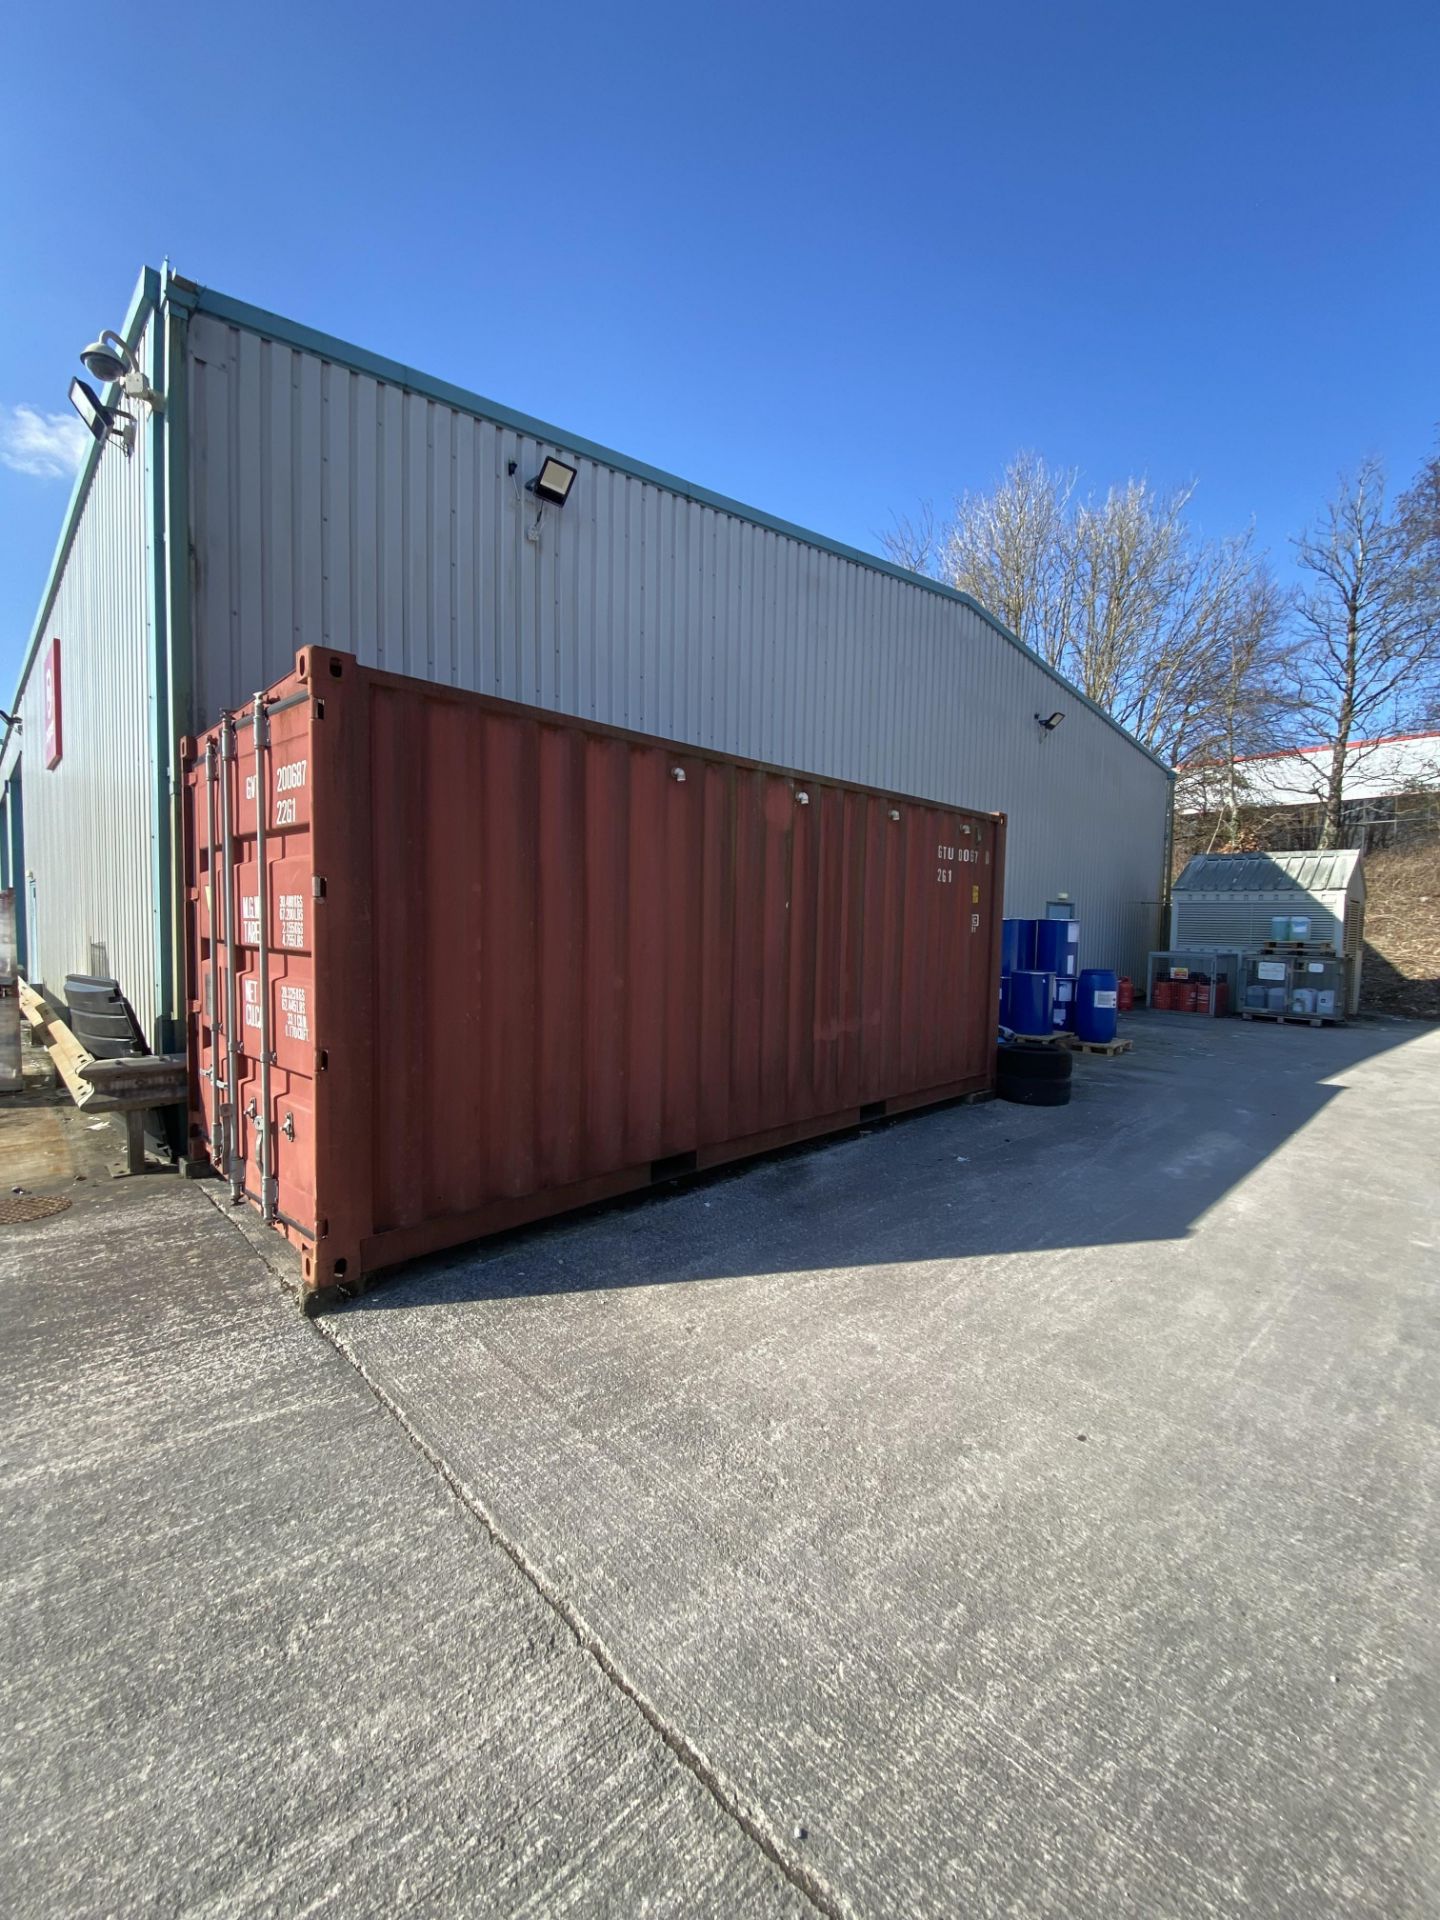 TMC-20E-18 2002 shipping container, red, dry inside, manufacturers no. TP-223209 - Image 3 of 10